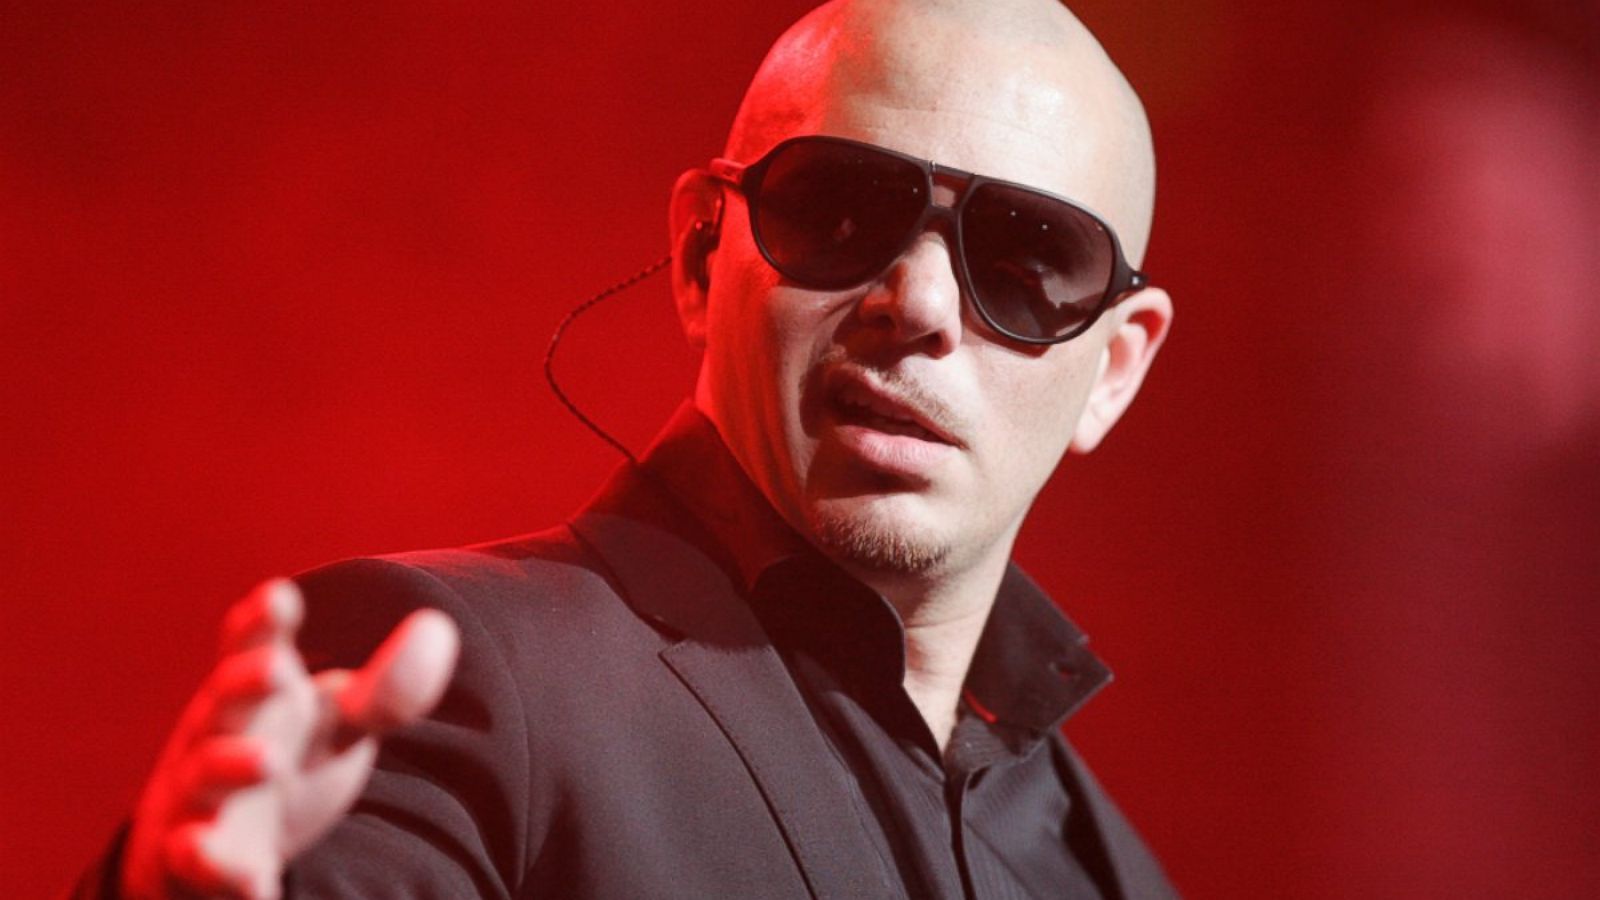 Pitbull Launches an Unlikely New Venture